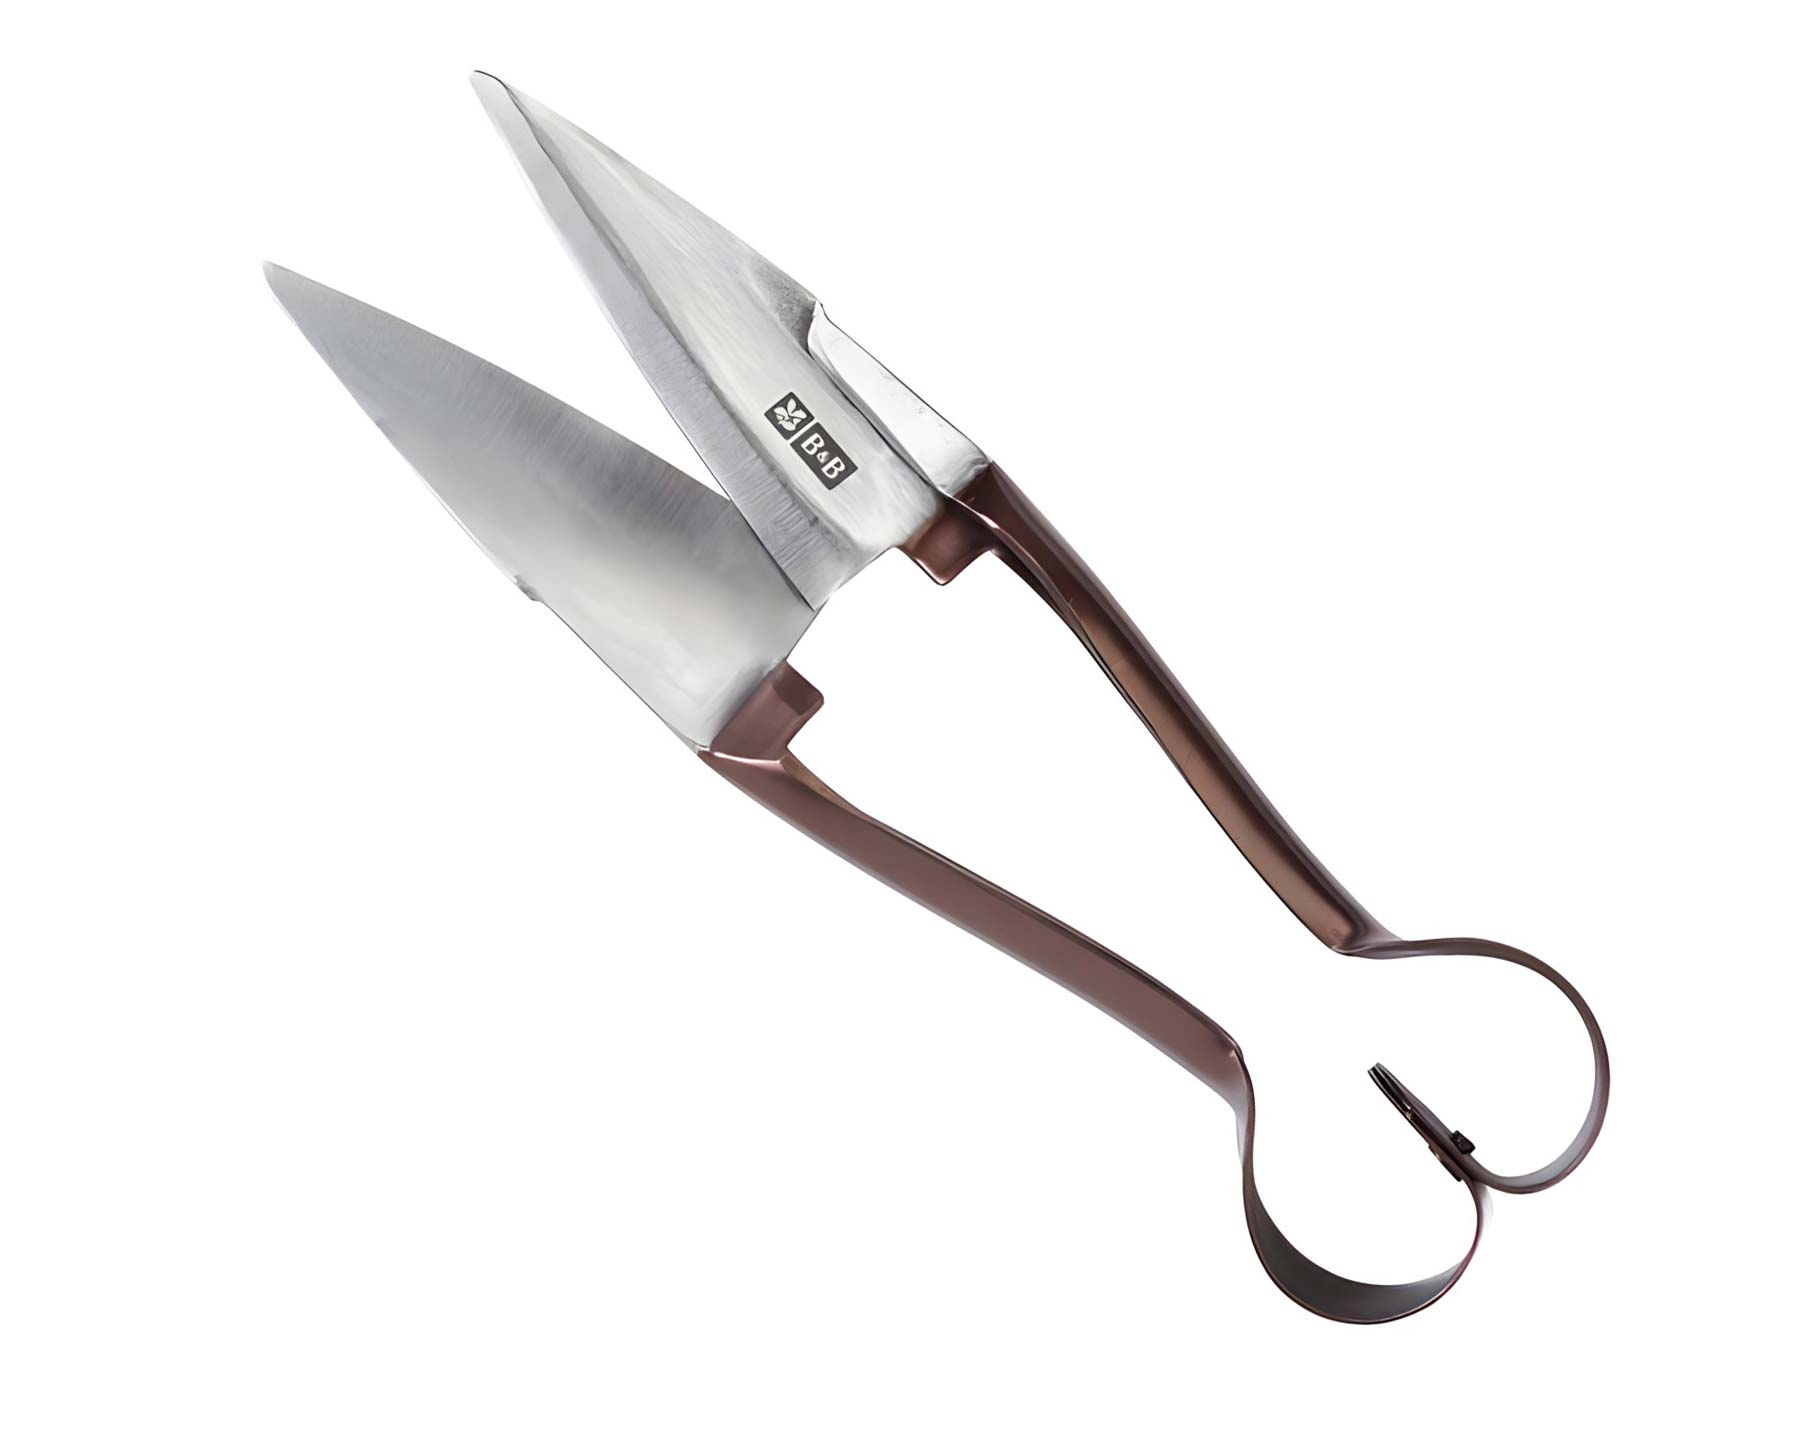 Topiary Shears - part of the new National Trust range of garden tools by Burgon and Ball